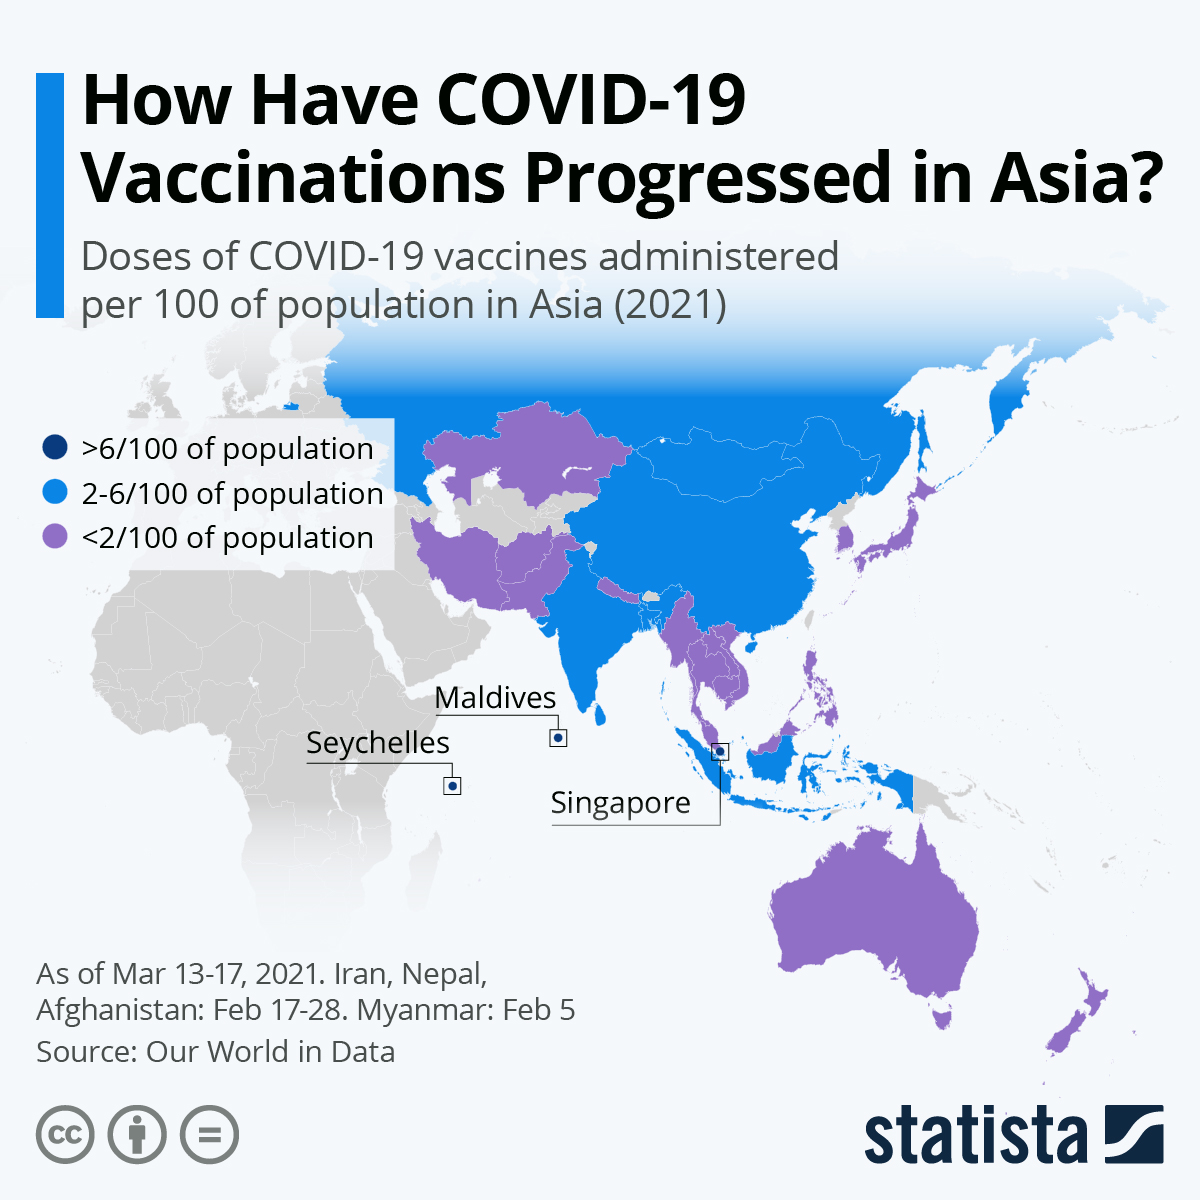 How Have COVID-19 Vaccinations Progressed in Asia?